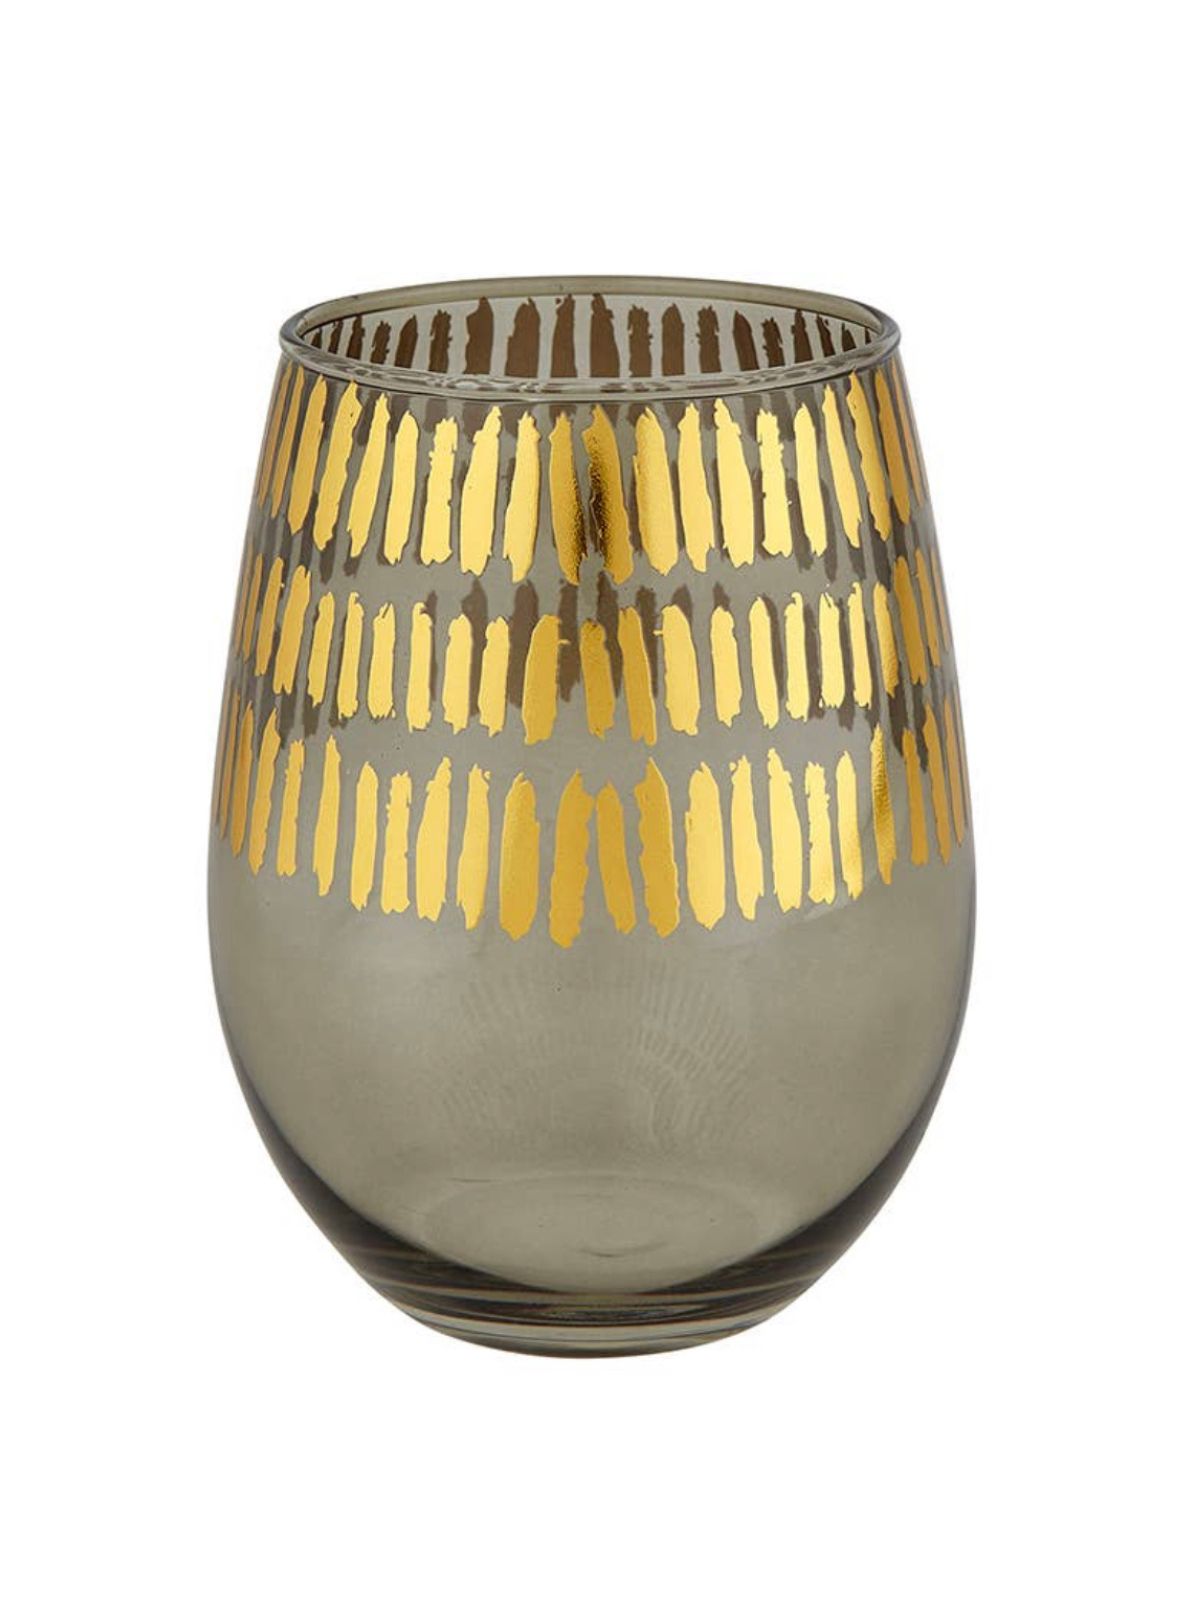 Feel luxurious sipping your favorite wine from these stemless wine glasses. The gold foil detail is elegant. Comes in Set of 2 20oz glasses Measuring 4.5H Available at KYA Home Decor  